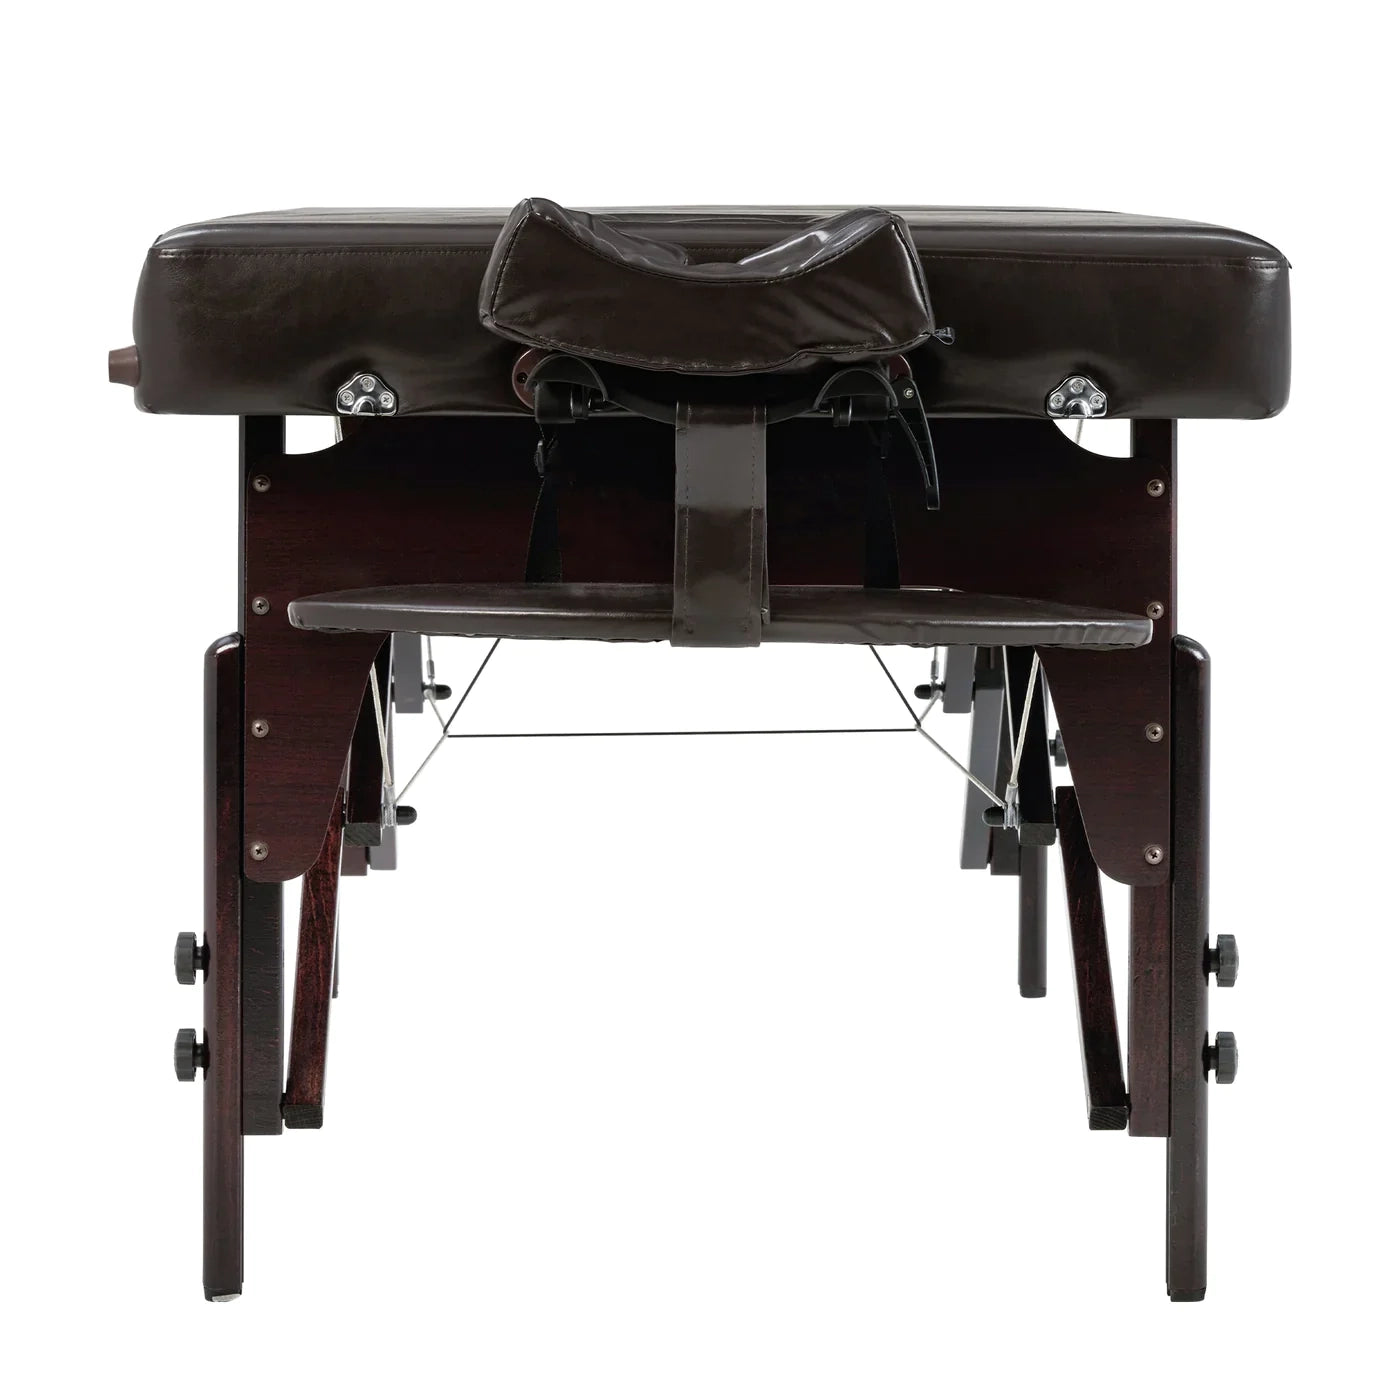 Spabodega 31” SUPREME™ LX Portable Massage Table Package with Ambient Light System